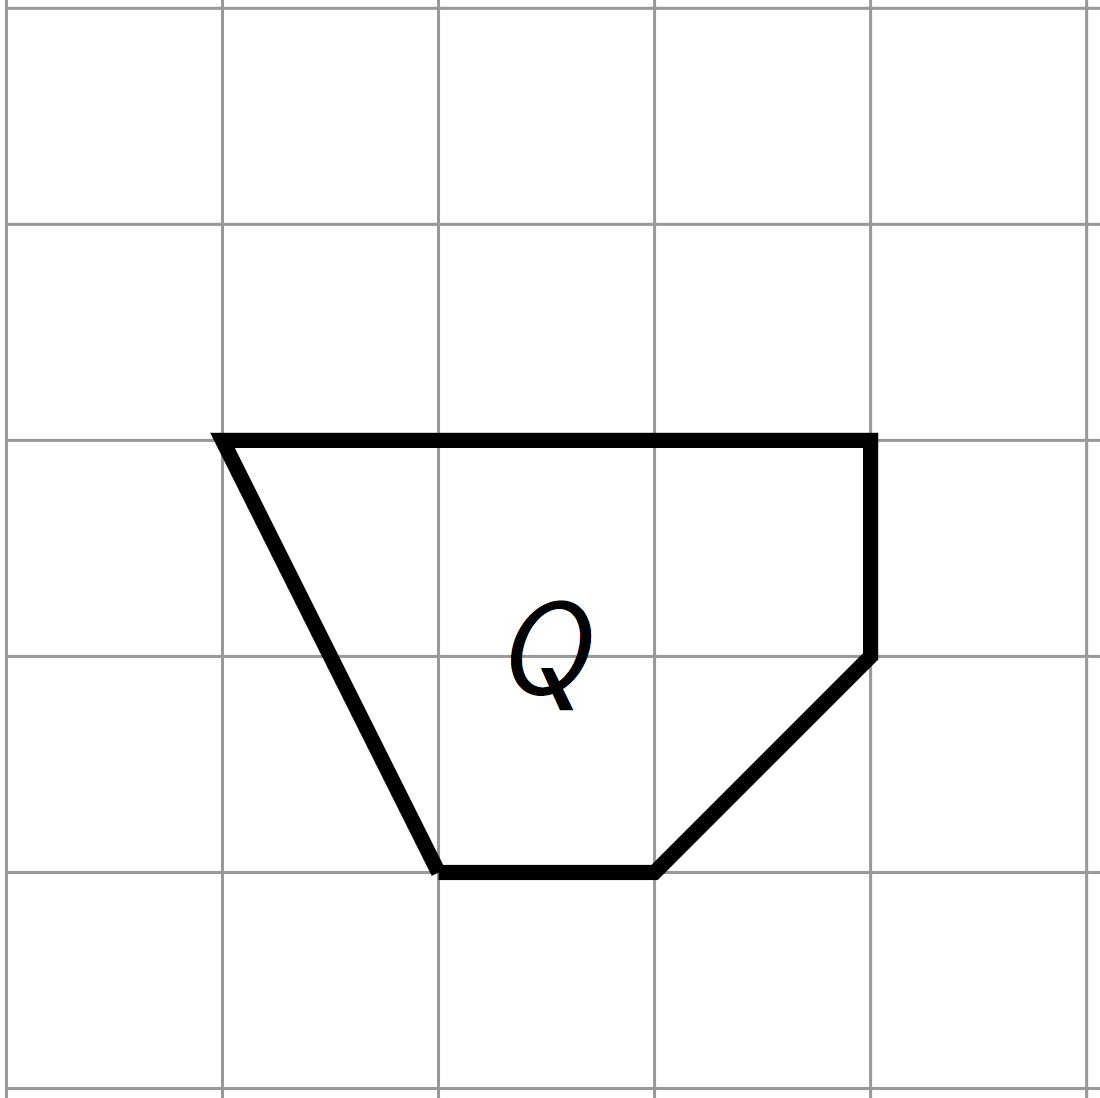 A polygon aligned to a square grid labeled Q. The polygon is made up of 4 shapes, joined together along their edges. On the left is a right triangle with a base of 1 unit and a height of 2 units. To the right of the triangle is a 2 unit by 1 unit rectangle aligned with its 2 unit side next to the 2 unit side of the triangle. To the right of this is a 1 unit square, on top of a one-half unit triangle.